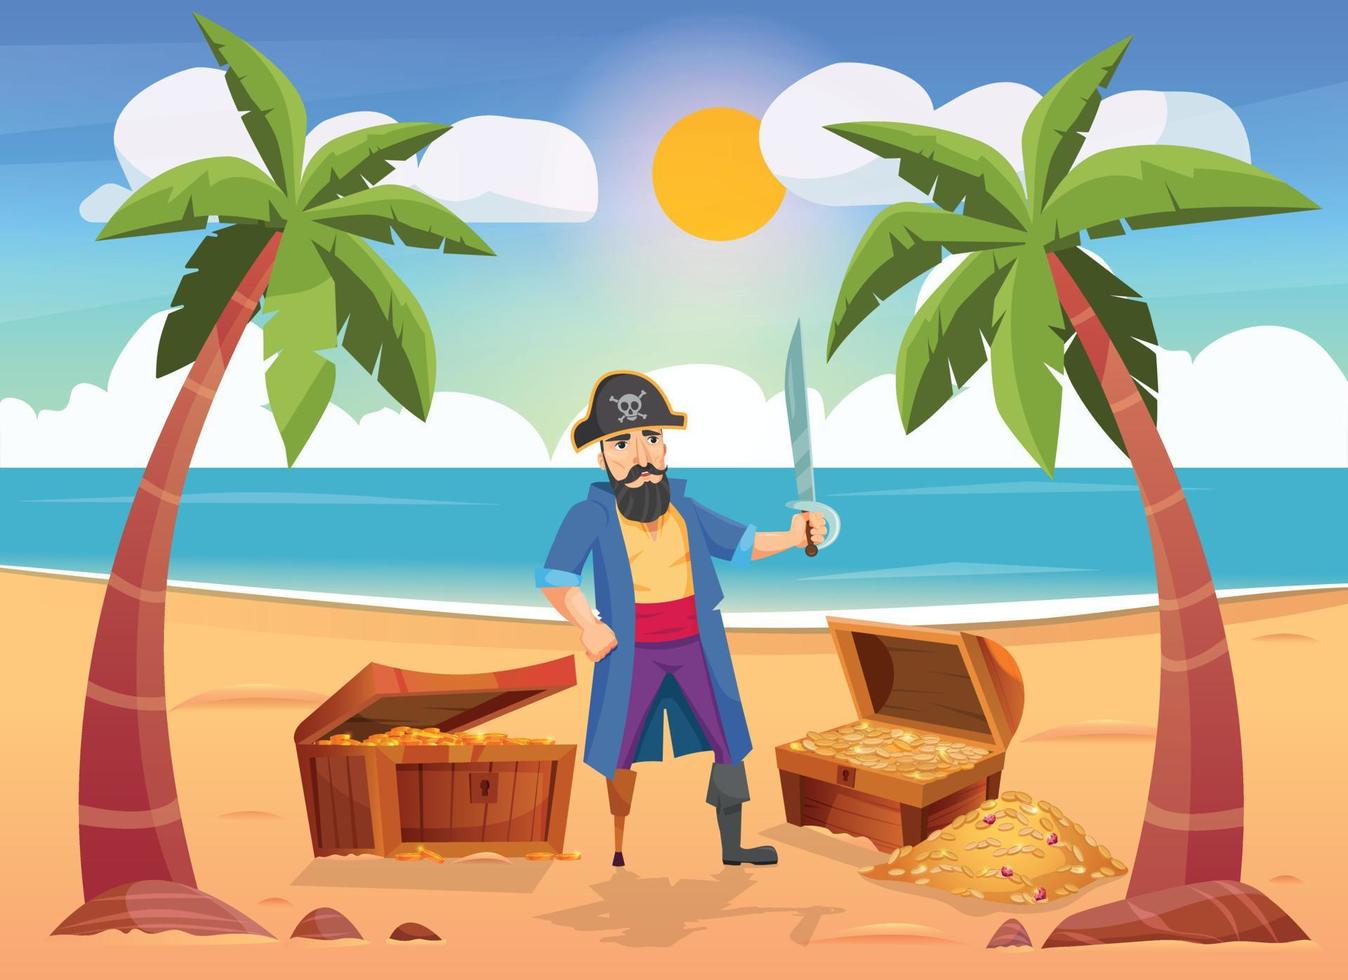 Pirate composition with island landscape human character with treasure chest vector illustration